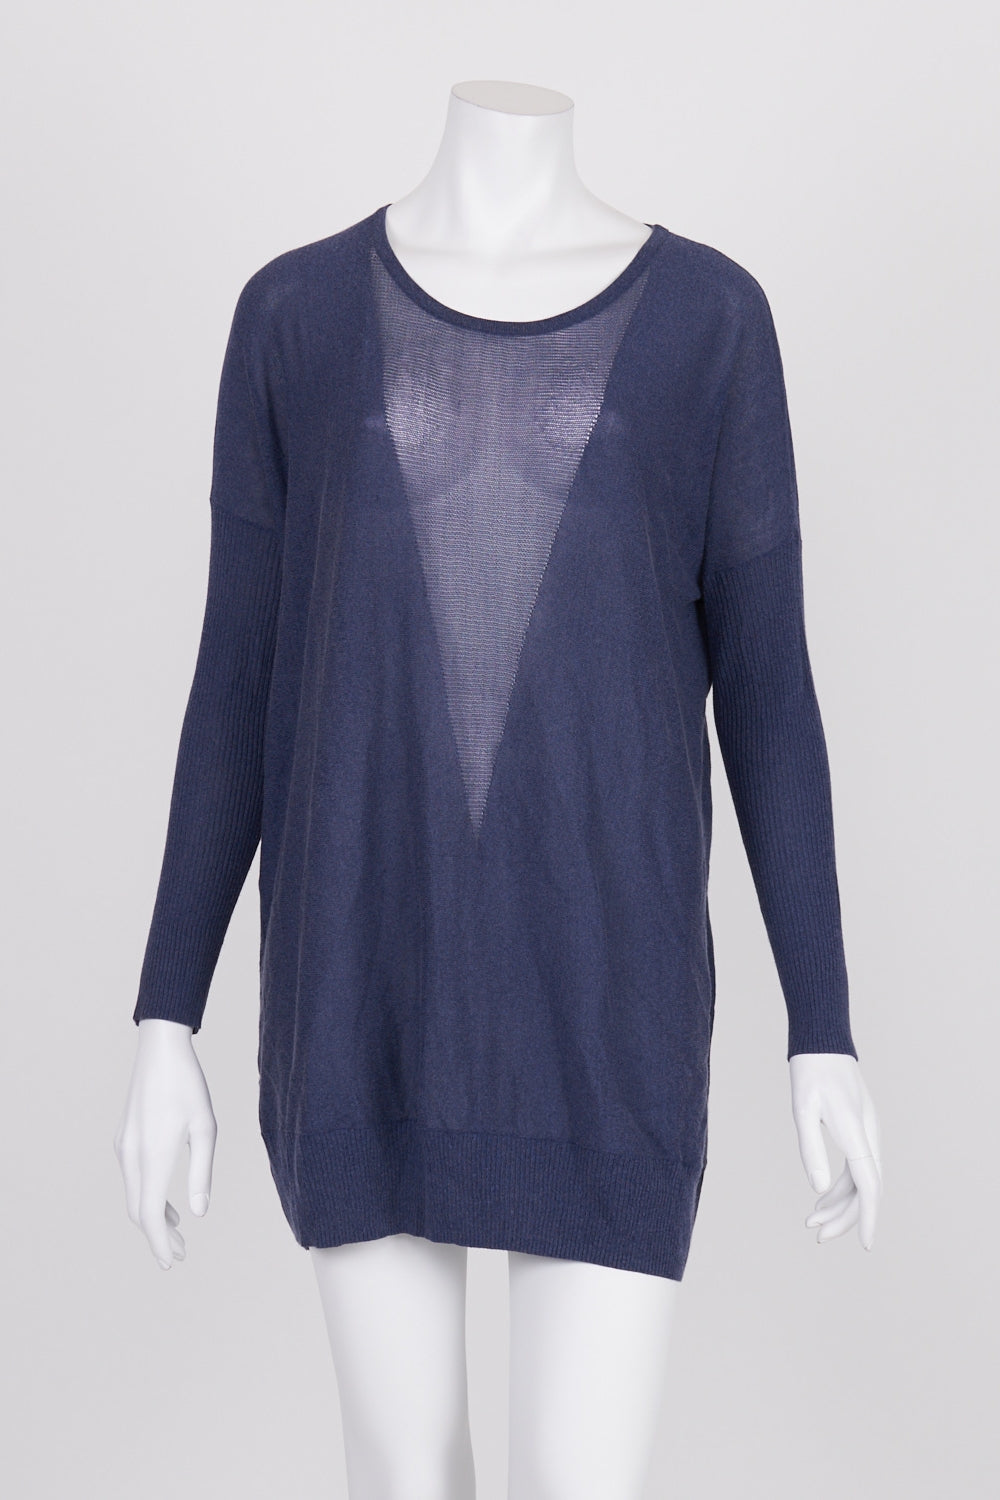 Nikel And Sole Blue Knit Jumper S